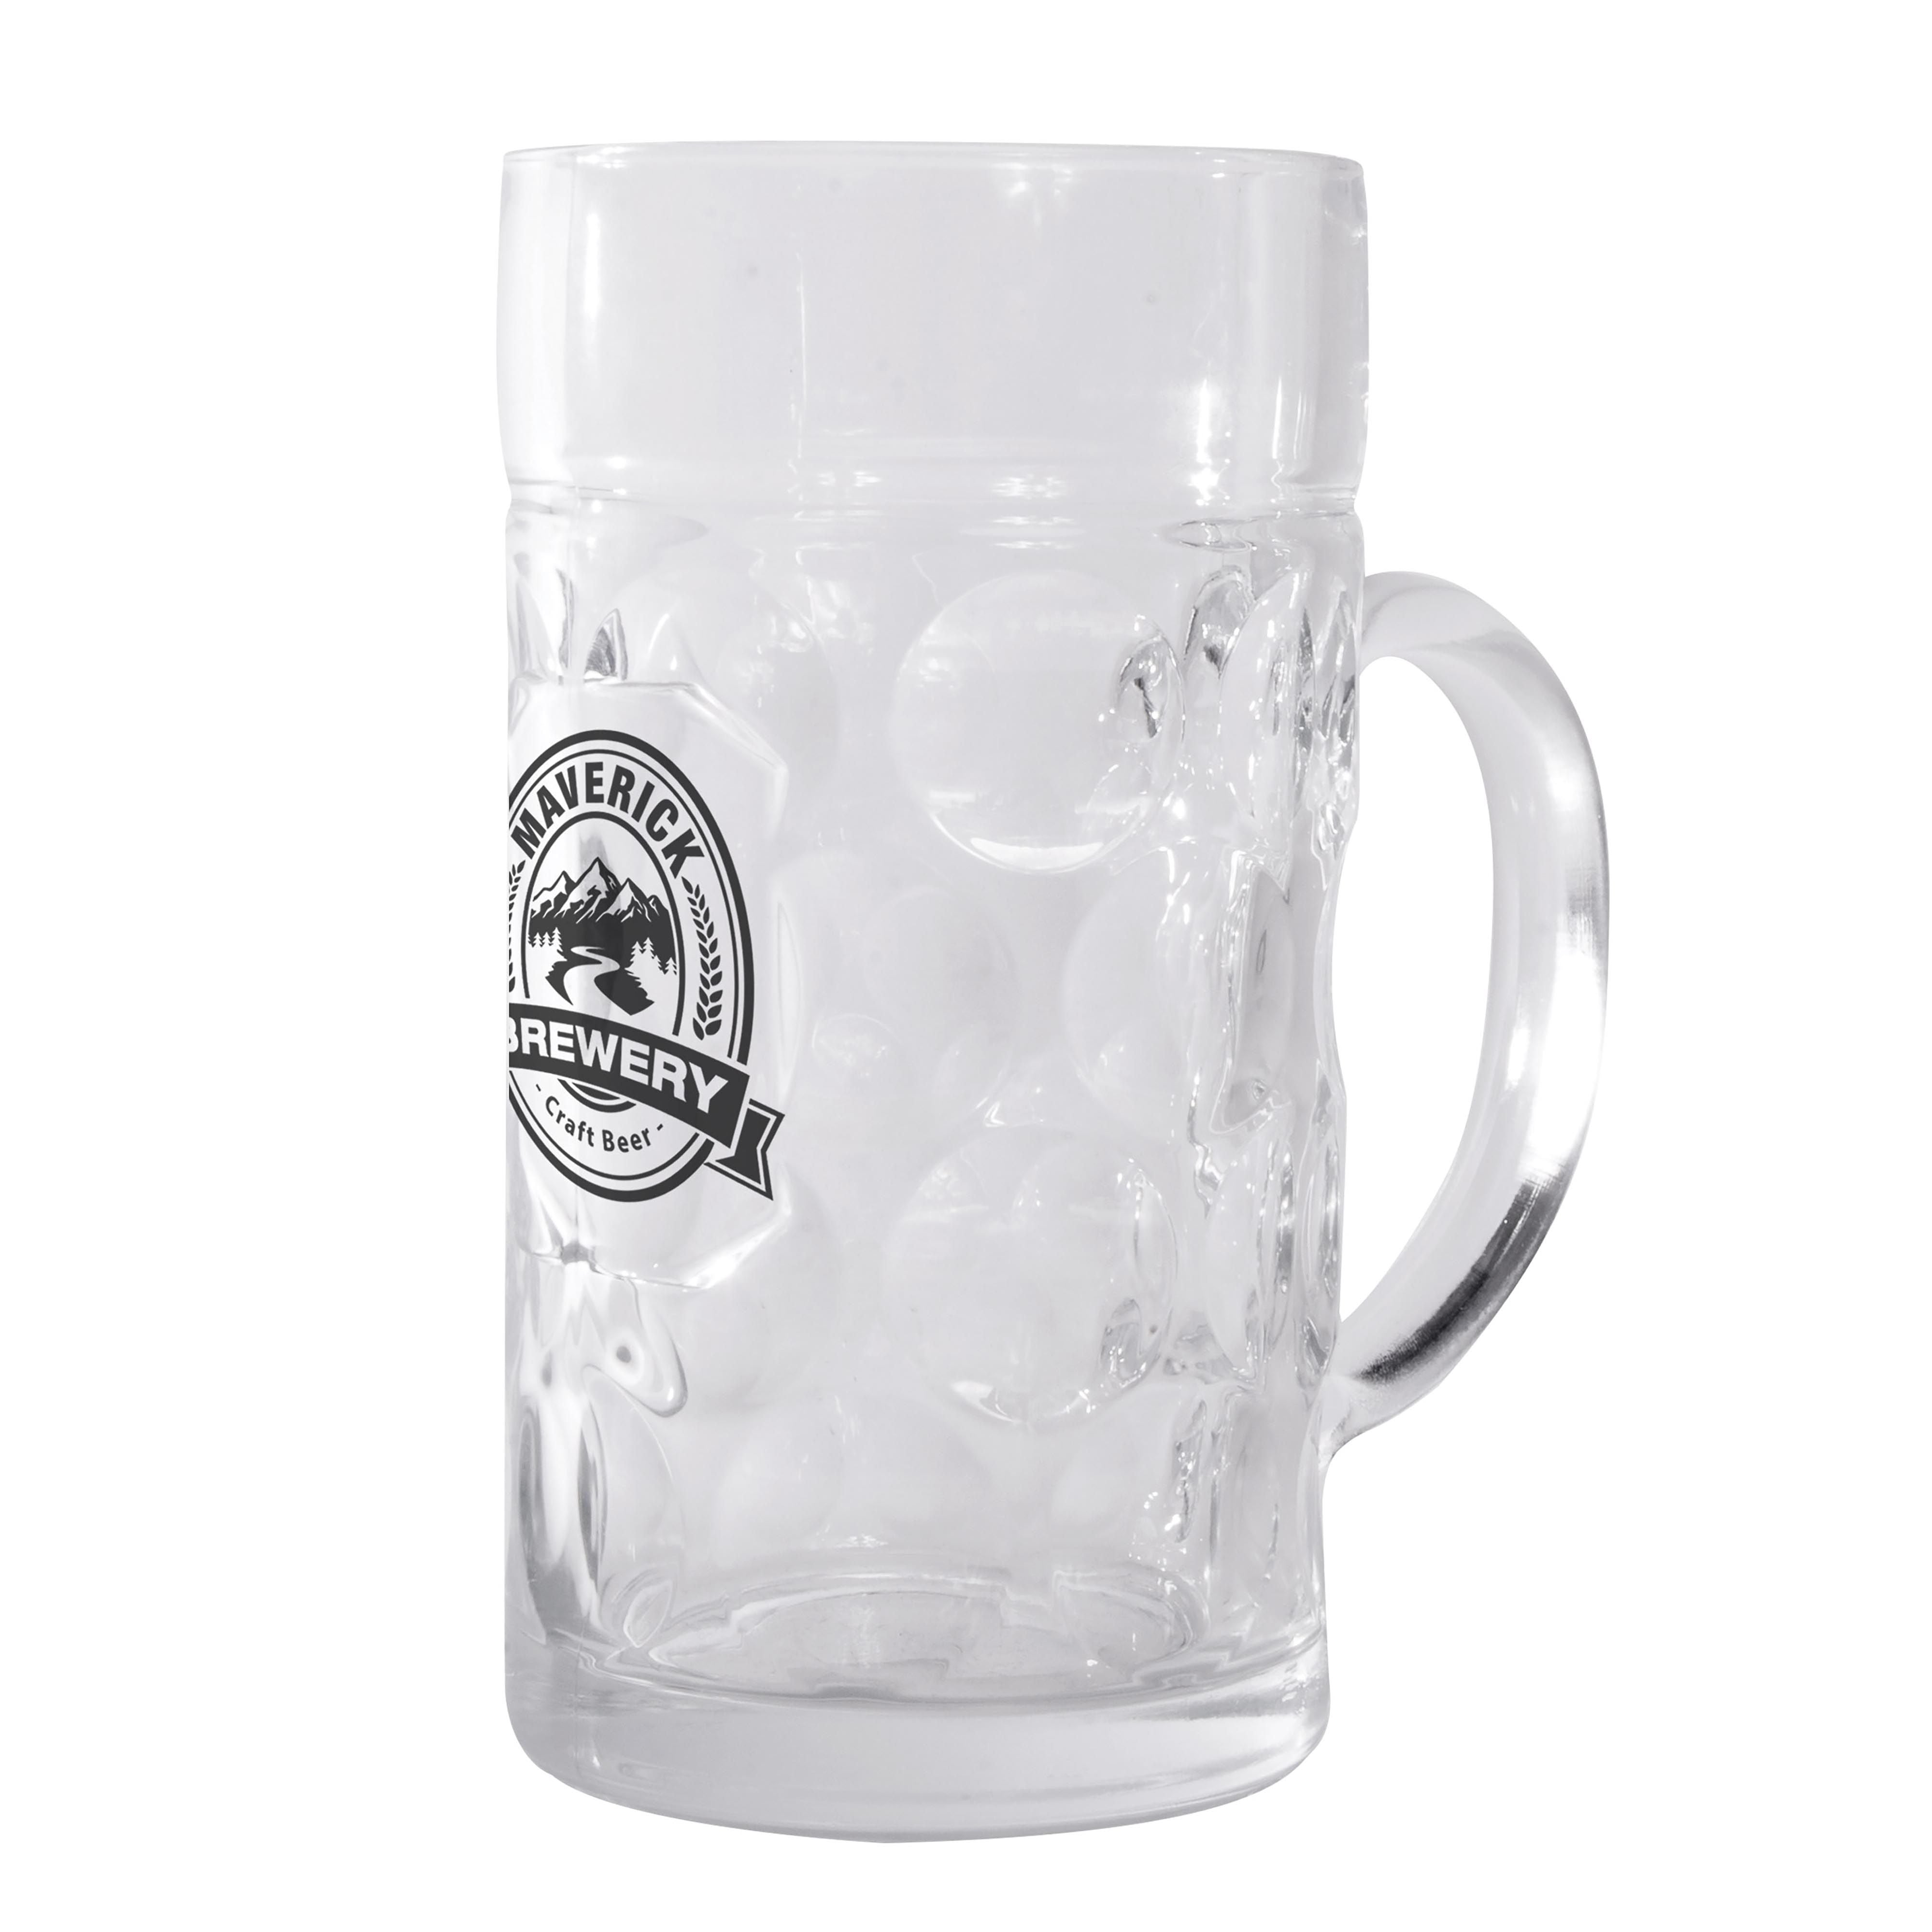 1 Litre Classic Beer Stein-Dining & Entertaining-Maverick-The Bay Room